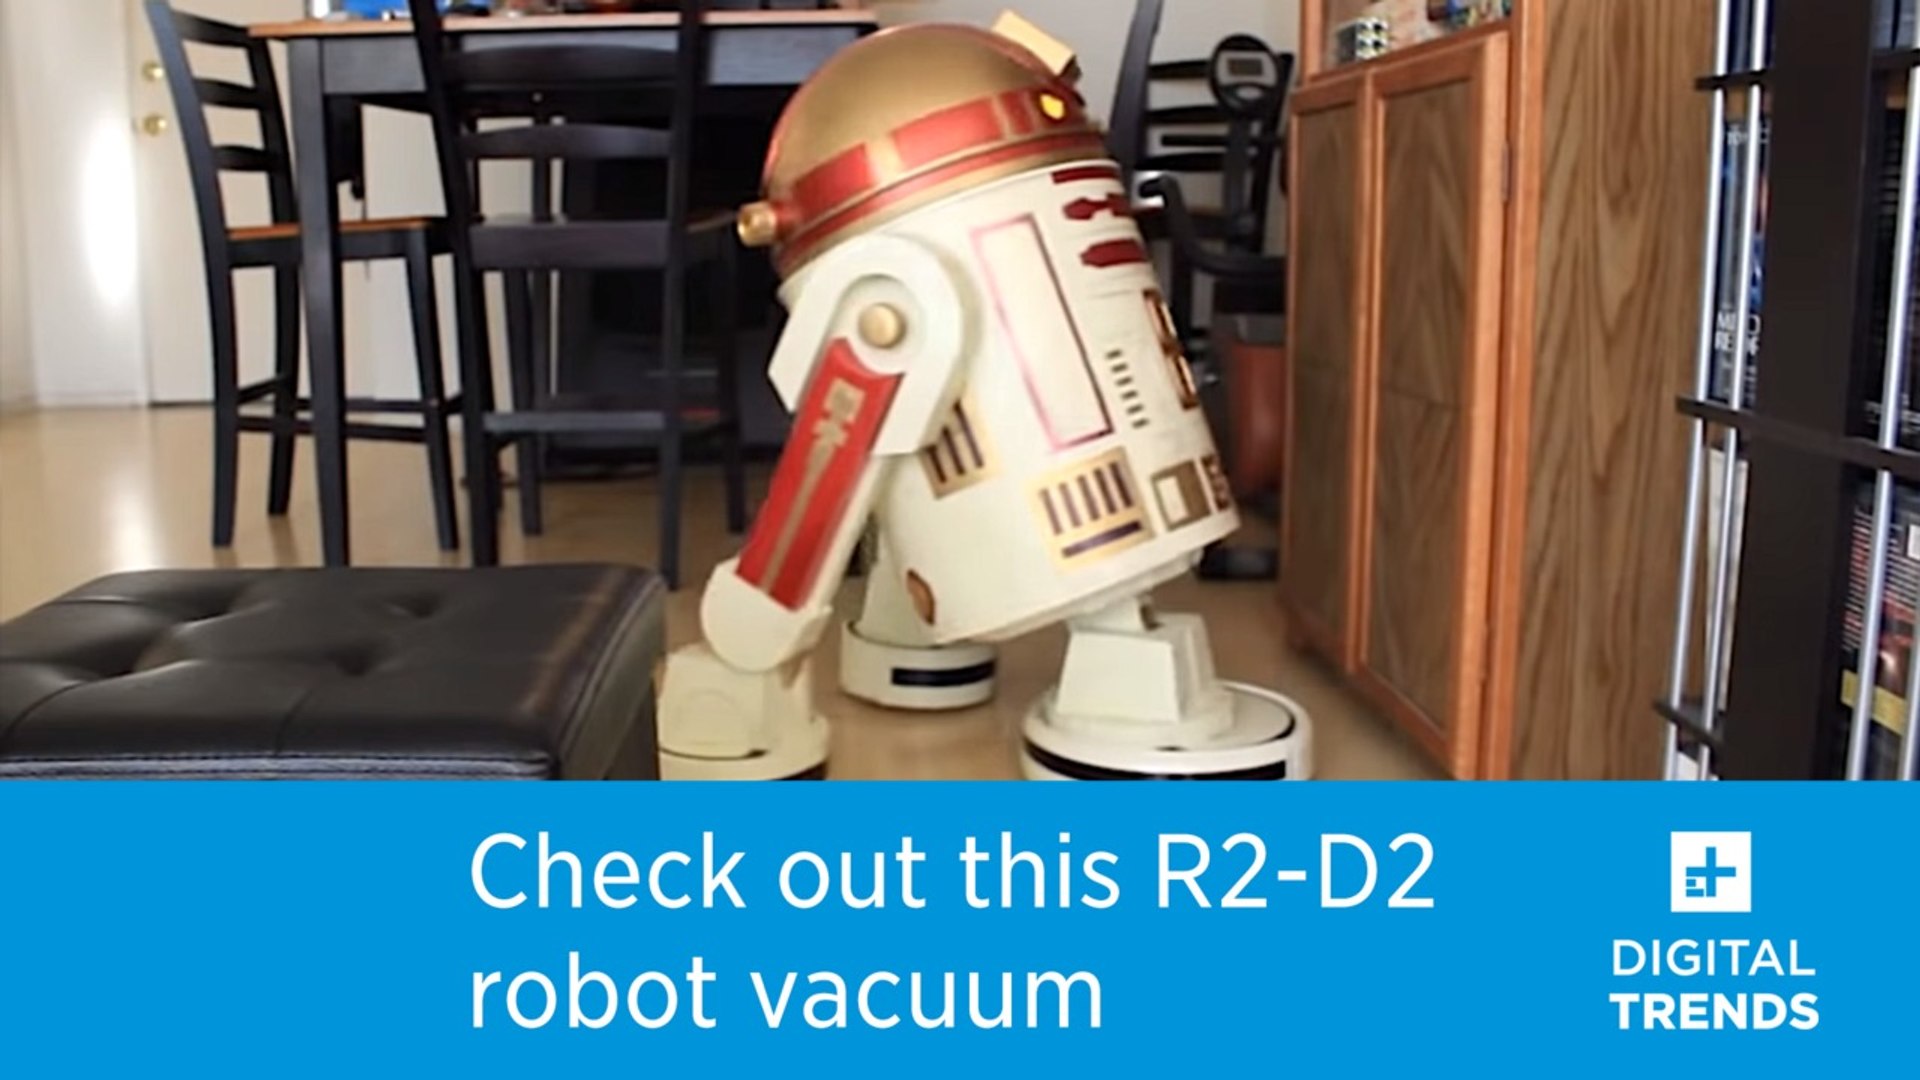 Check out this homemade R2-D2 robot vacuum - video Dailymotion